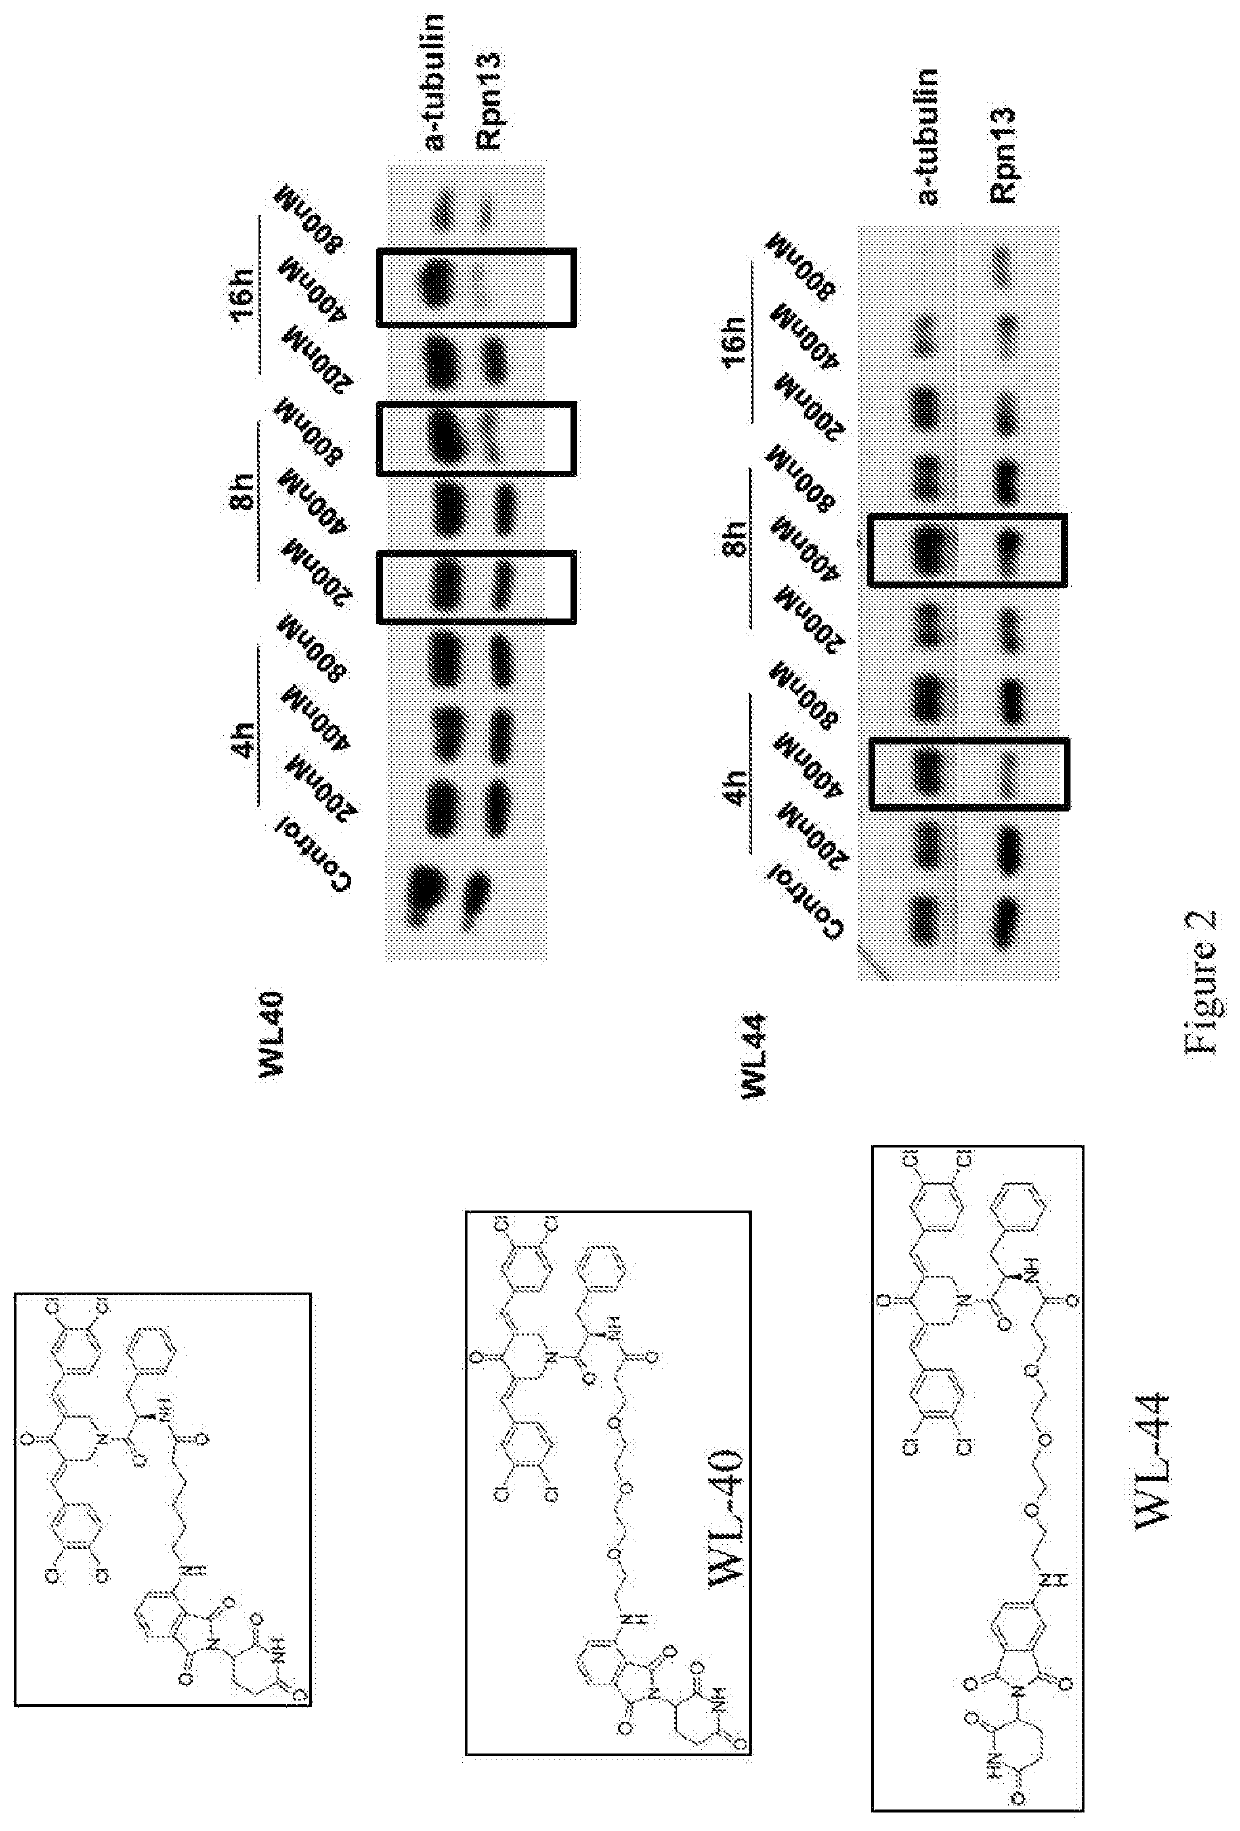 Small molecules that block proteasome-associated ubiquitin receptor rpn13 function and uses thereof